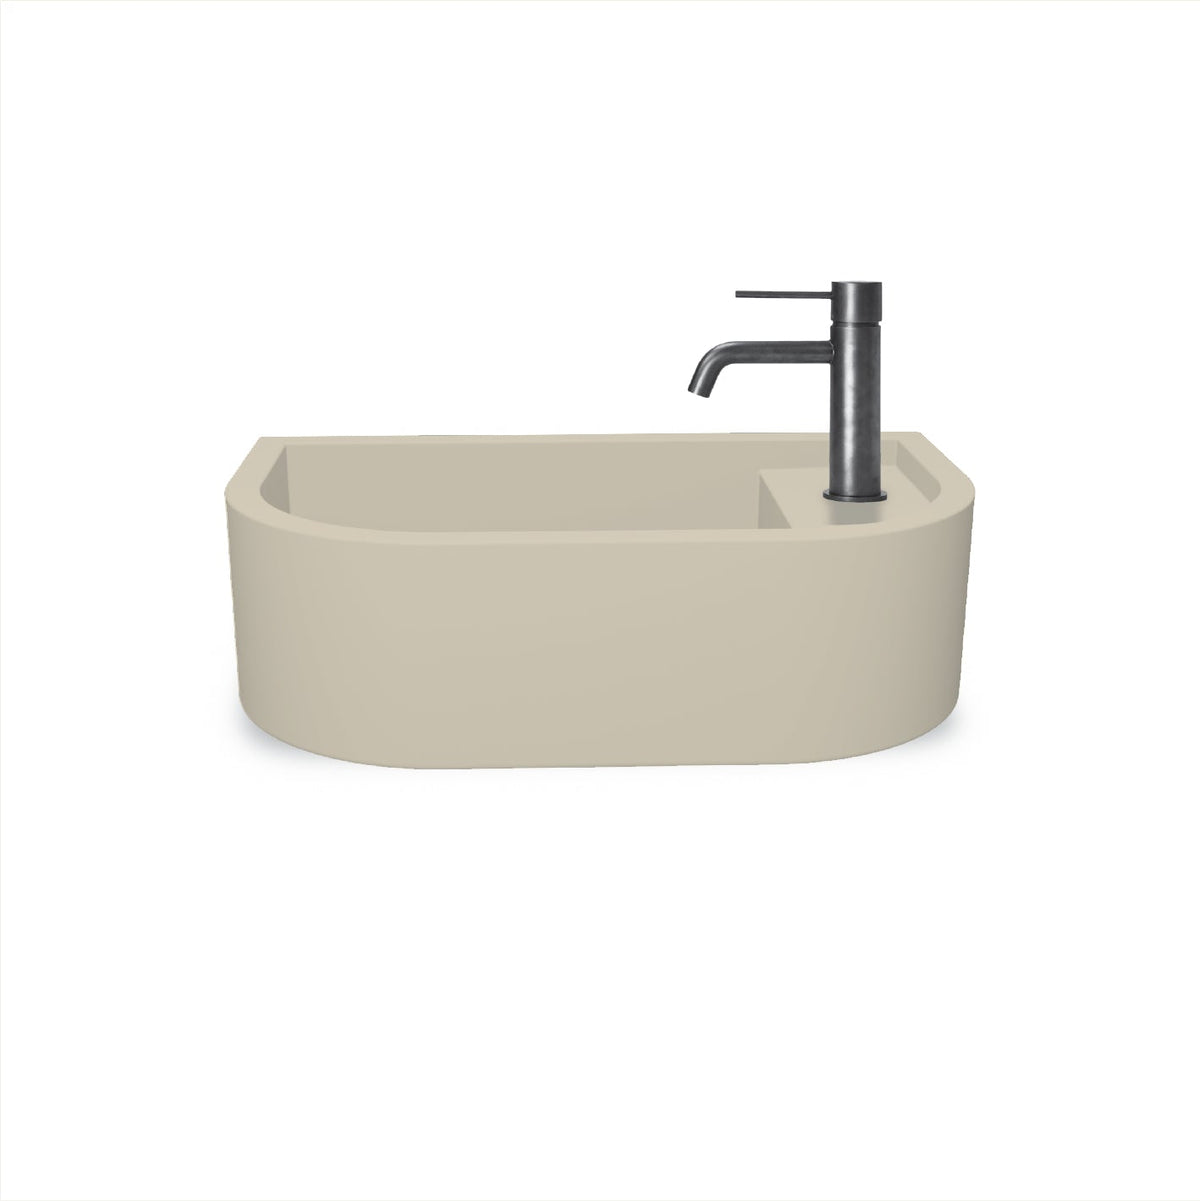 Loop 01 Basin - Overflow - Wall Hung (Sand,Tap Hole,White)